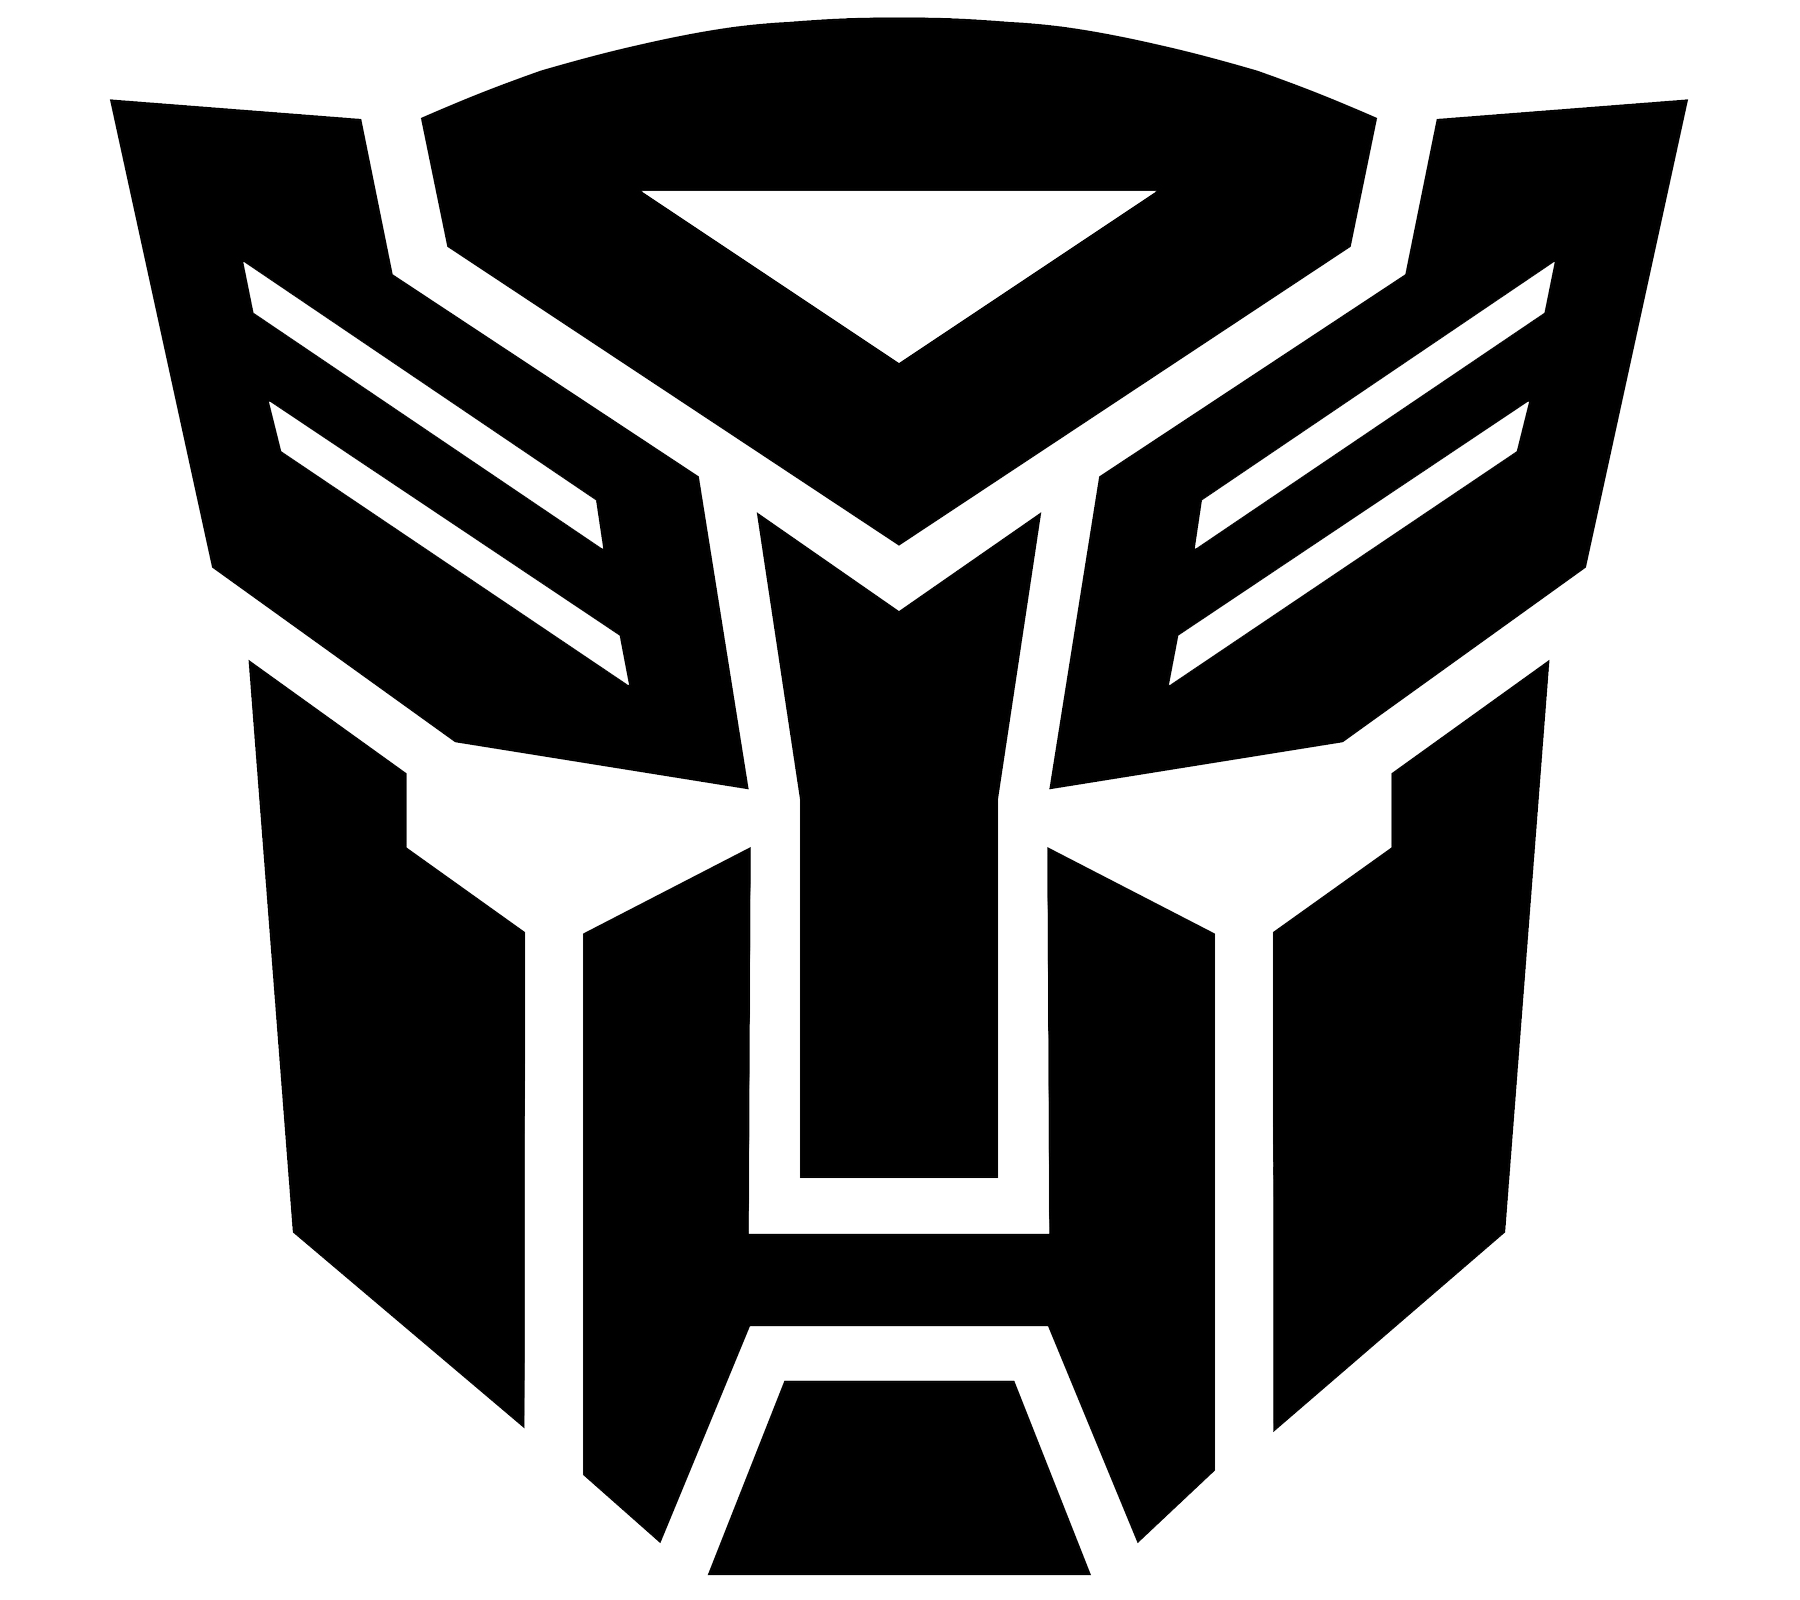 Black and White Transformers Logo - Transformers Logo, symbol meaning, History and Evolution